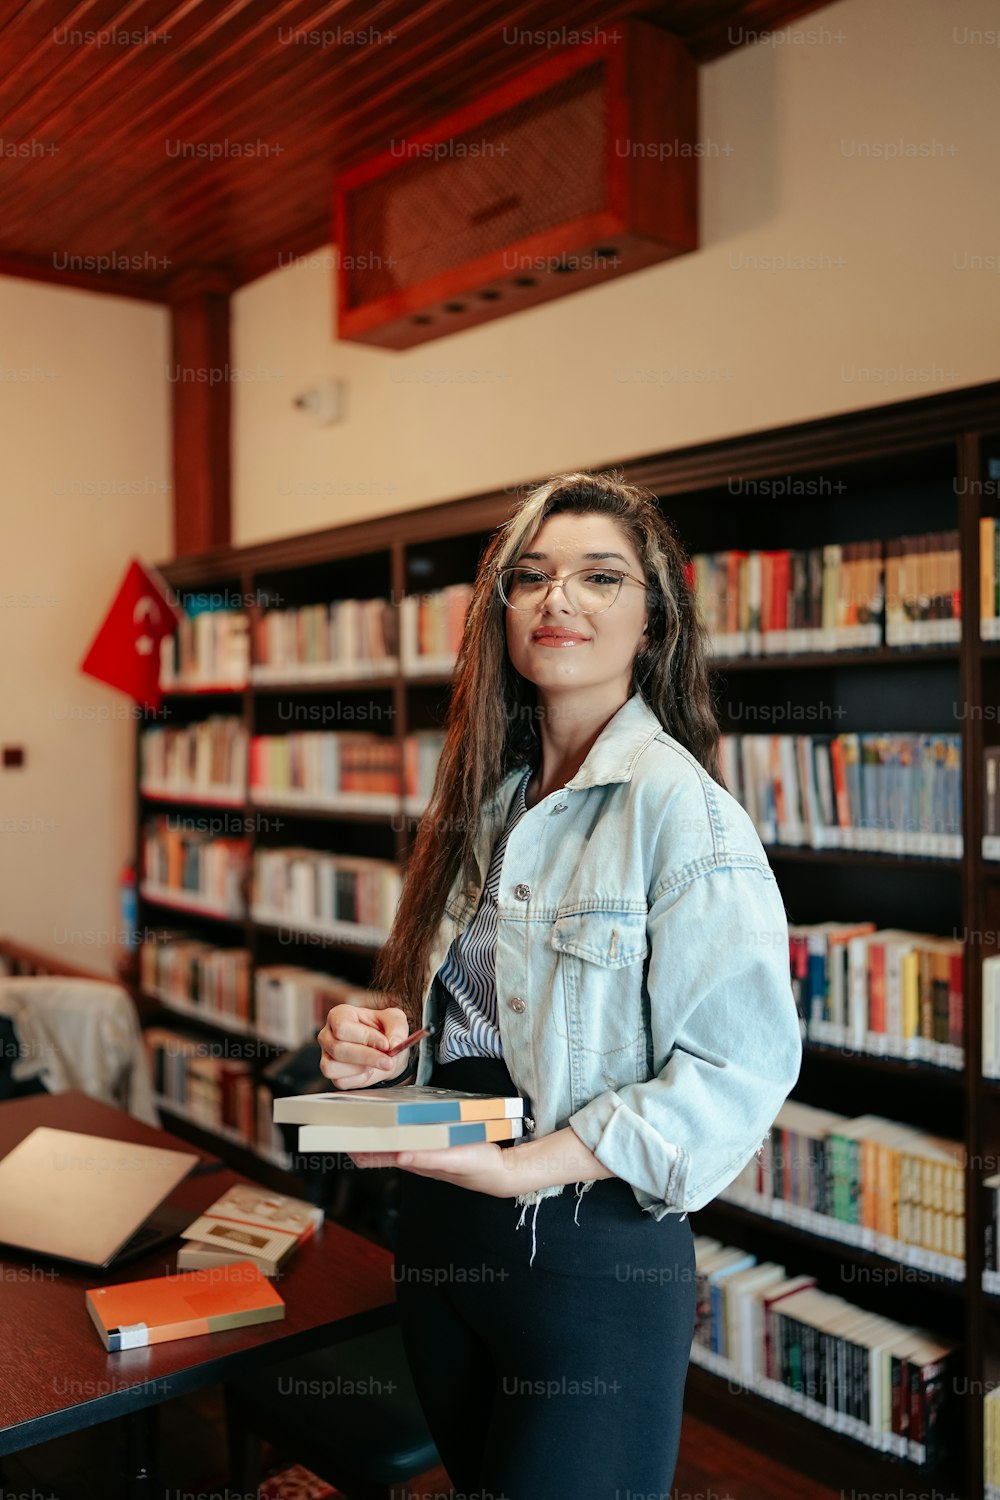 a woman standing in front of a bookshelf holding a book